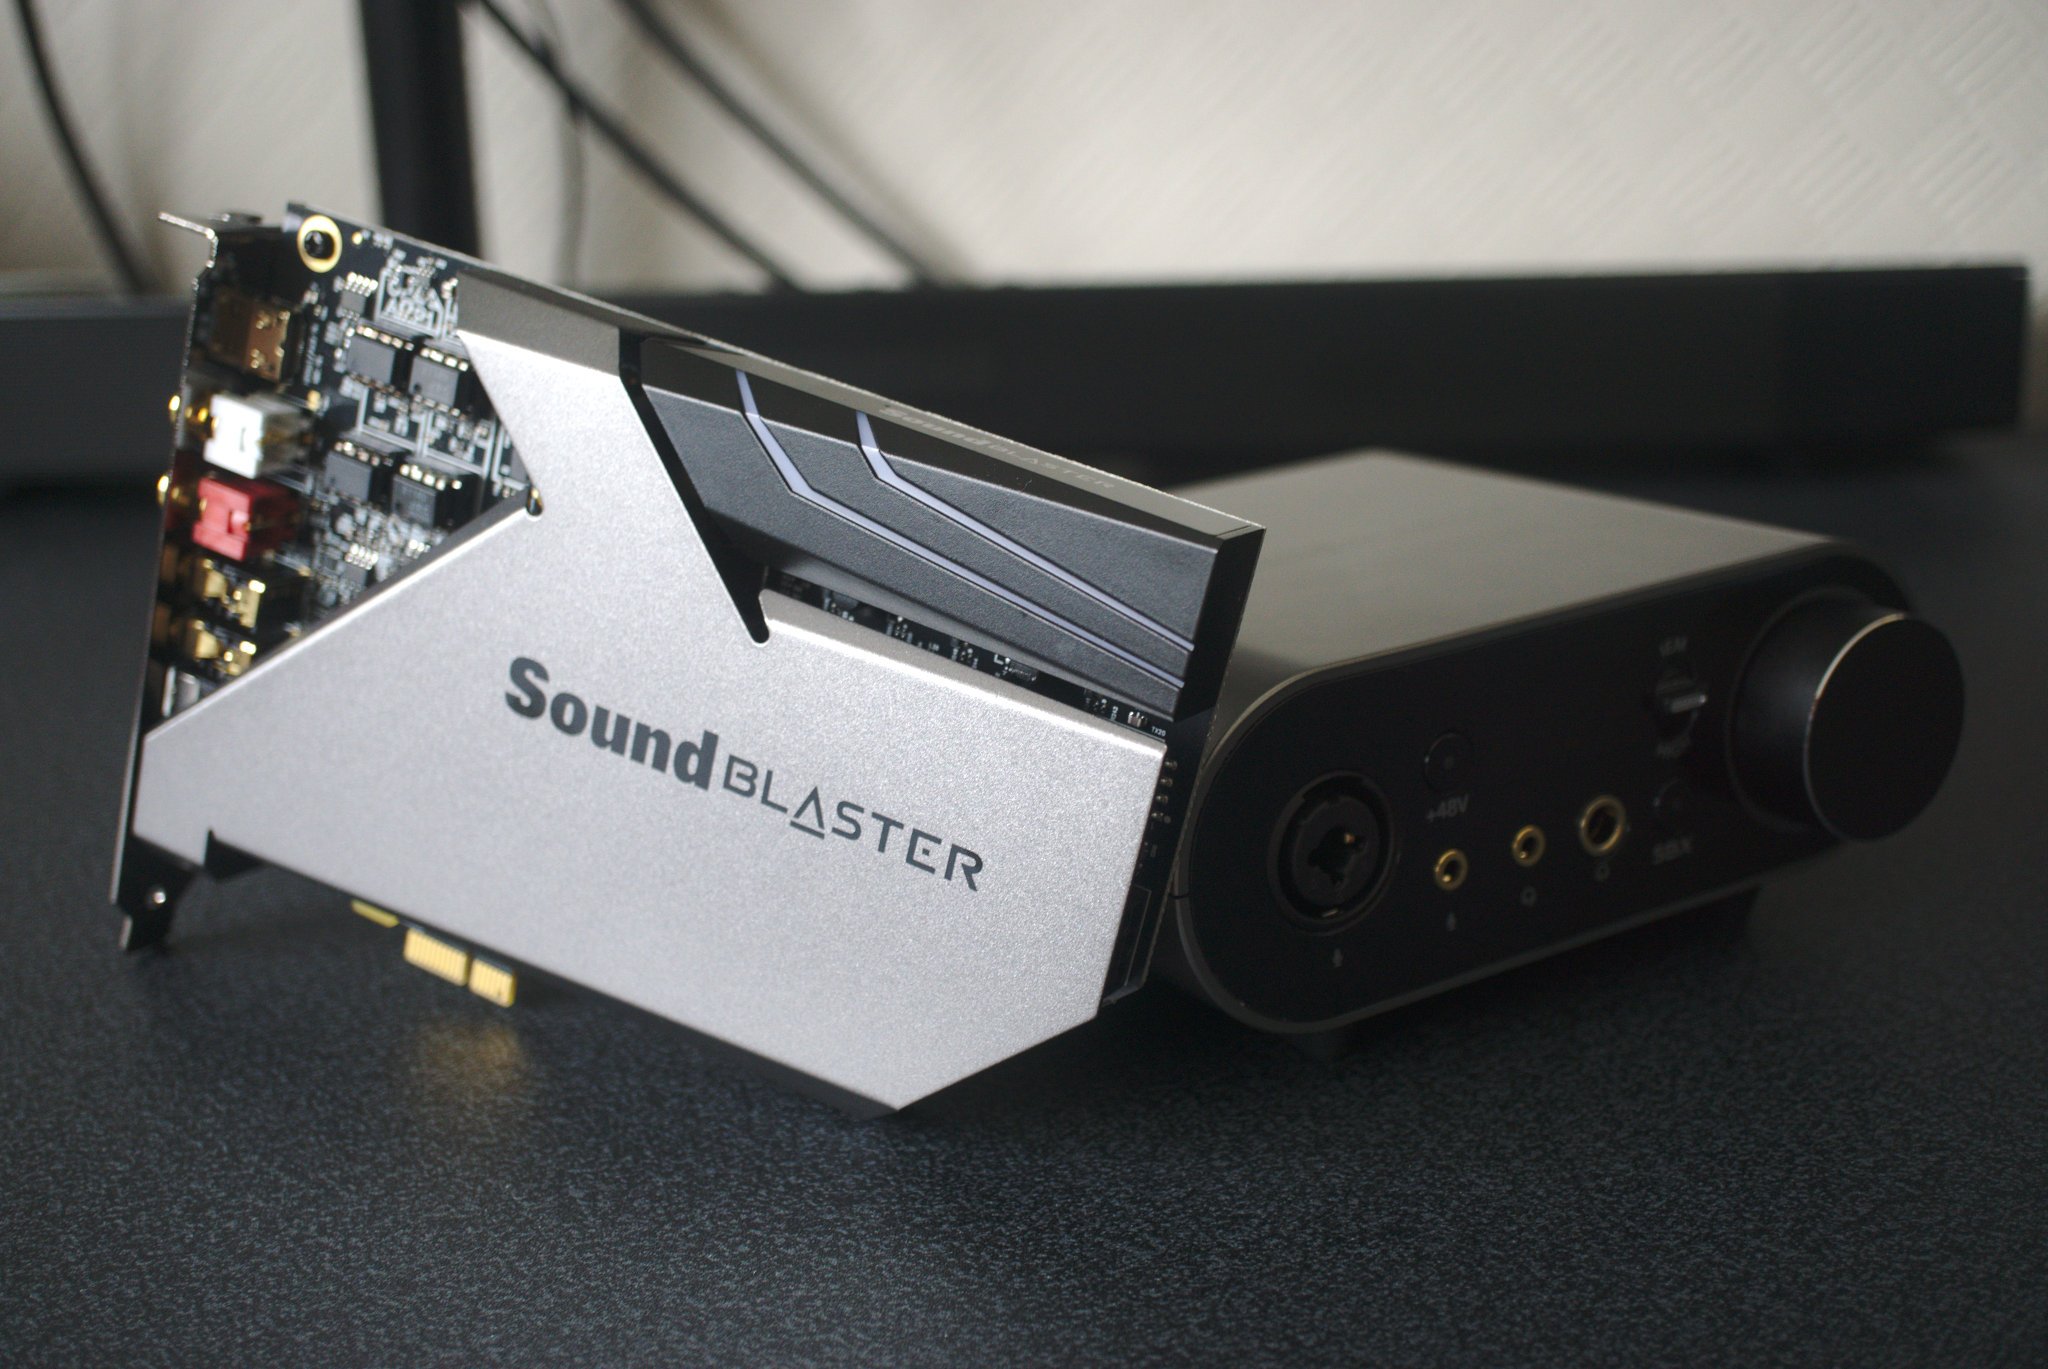 Creative Sound Blaster AE-9 review: Incredible PC audio with a